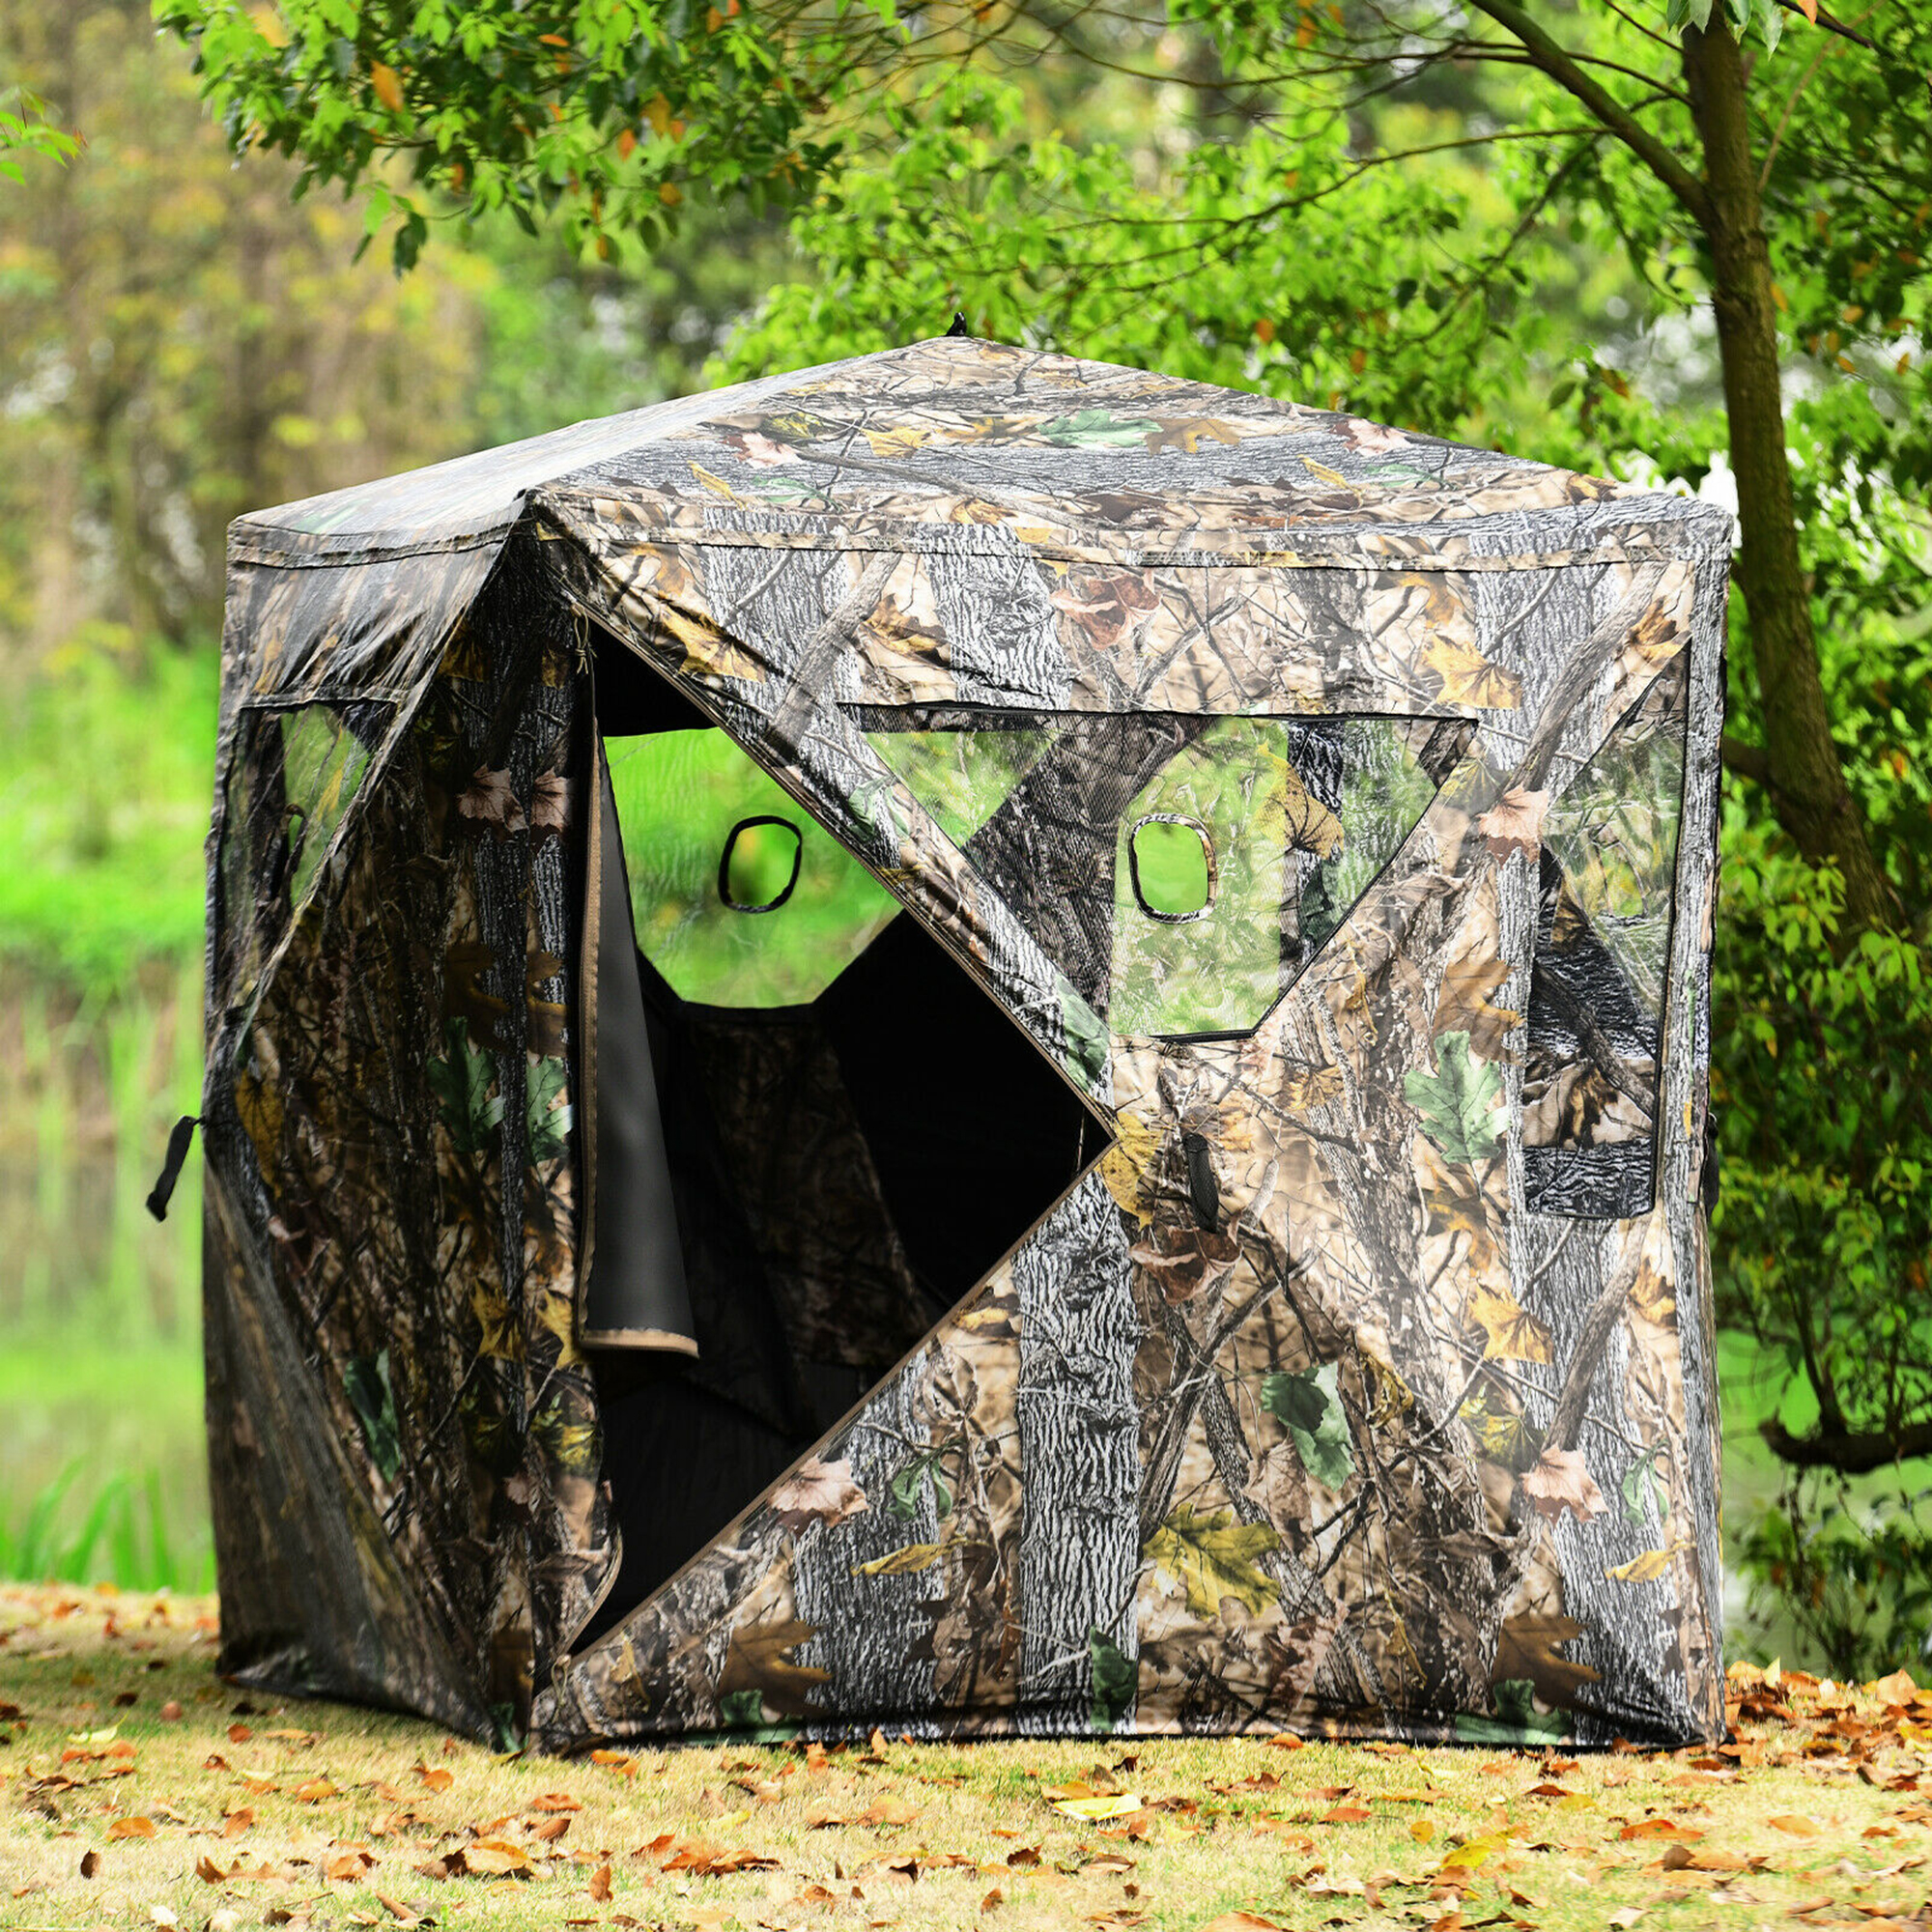 Costway 3 Person Portable Hunting Blind Pop-Up Ground Tent w/ Gun Ports & Carrying Bag